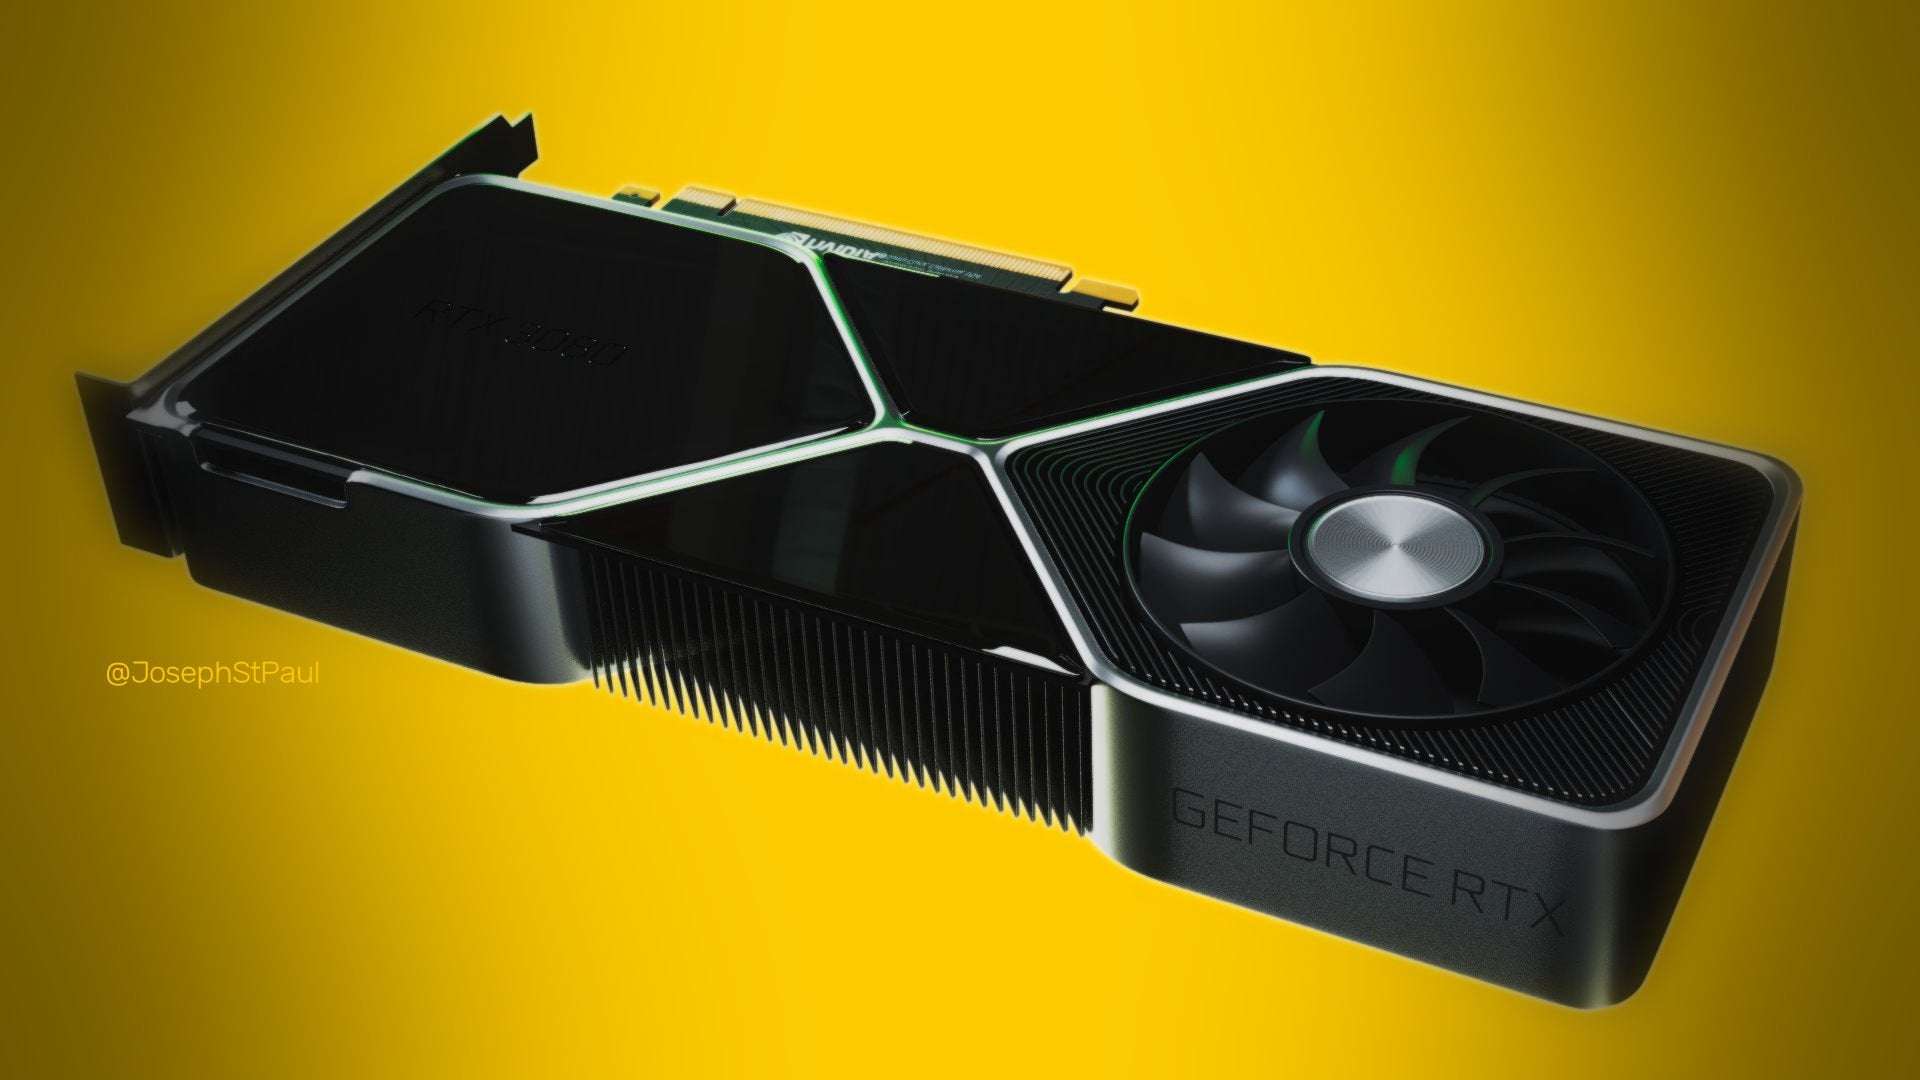 image for Confirmed: NVIDIA GeForce RTX 3090 has 24GB memory, RTX 3080 gets 10GB